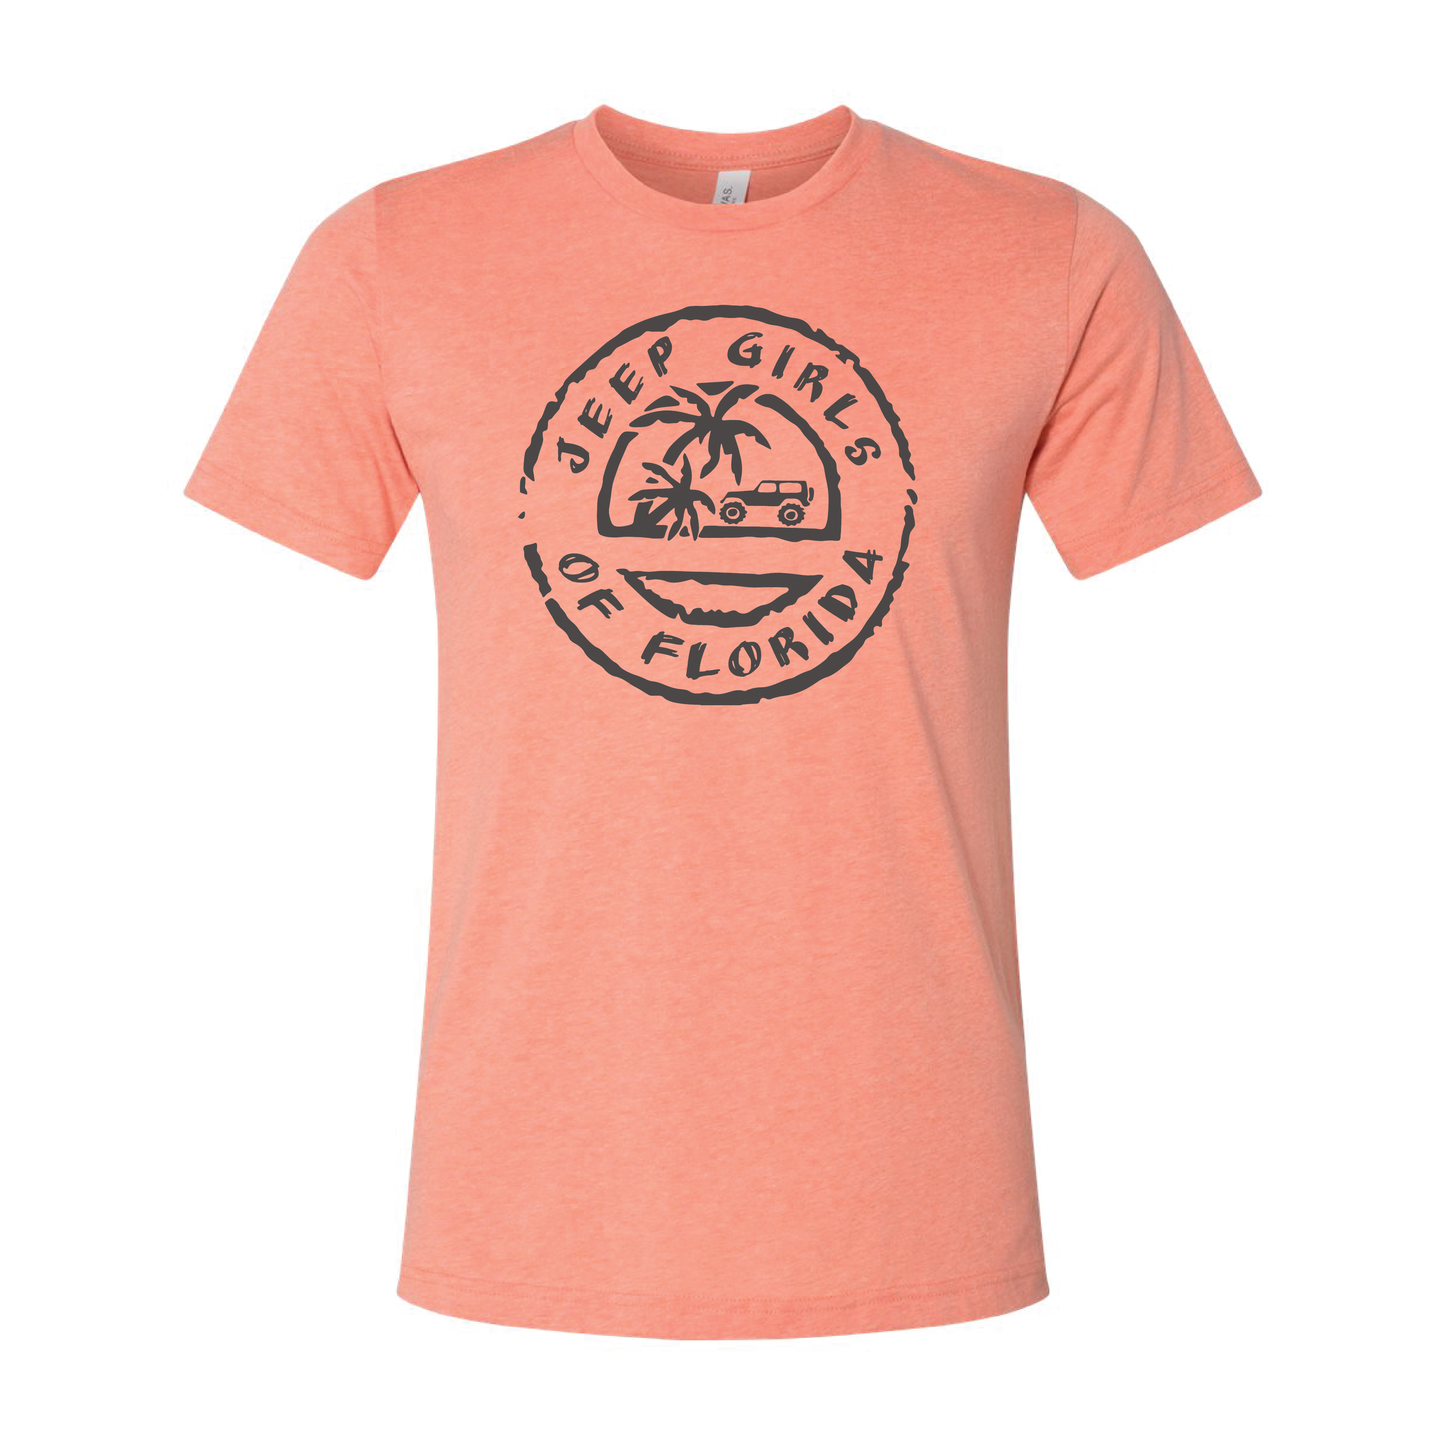 JGOF Beach Logo - Shirt, Tank Top, Long Sleeve or Hoodie - Available in Multiple Colors